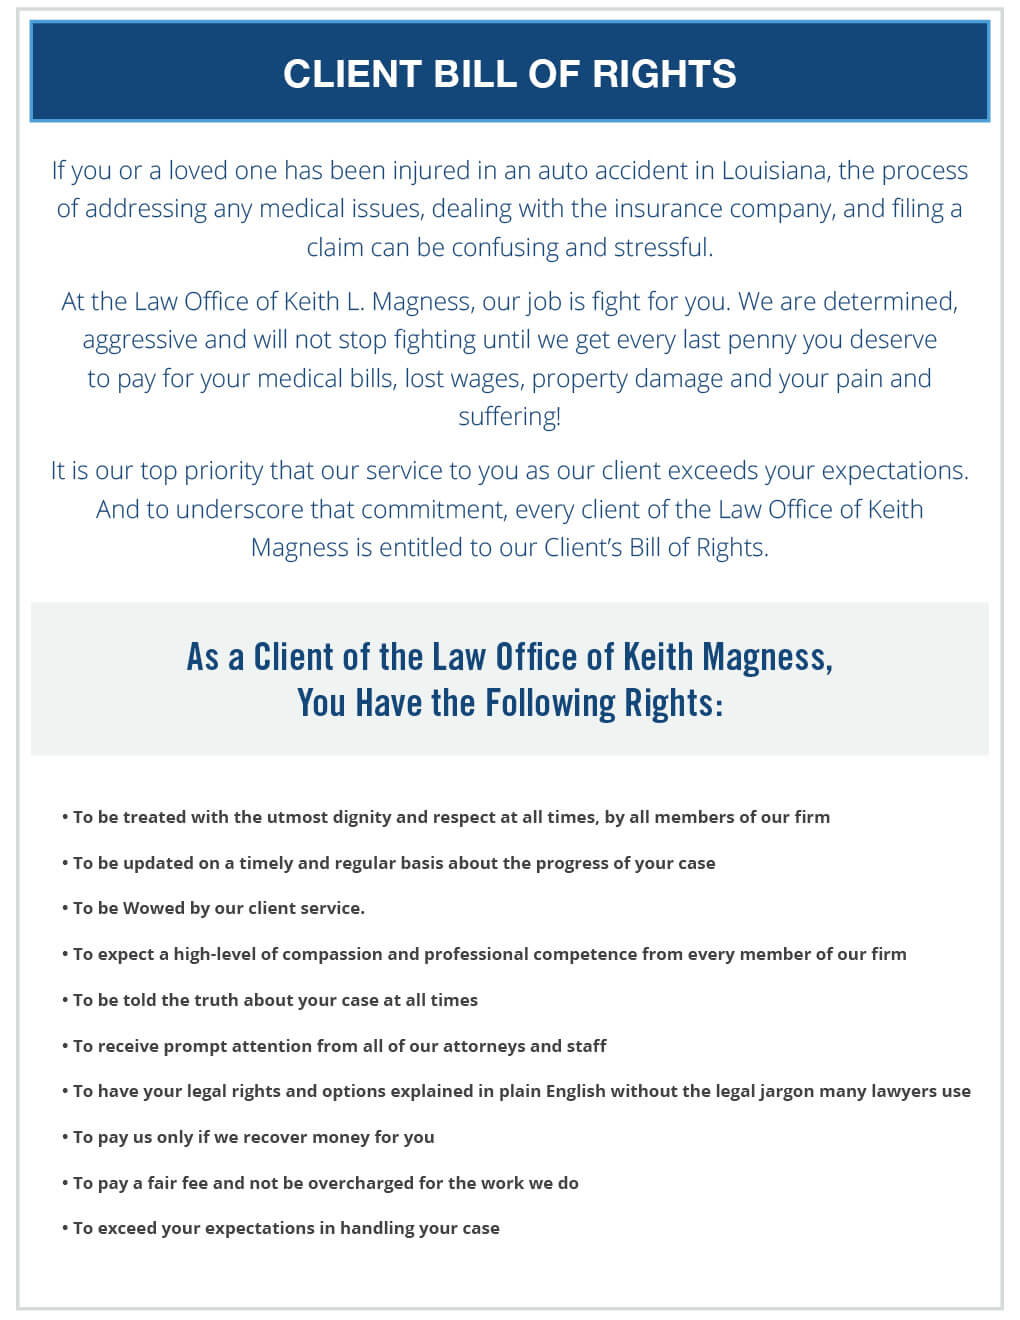 Auto Accident Injury Client Bill of Rights